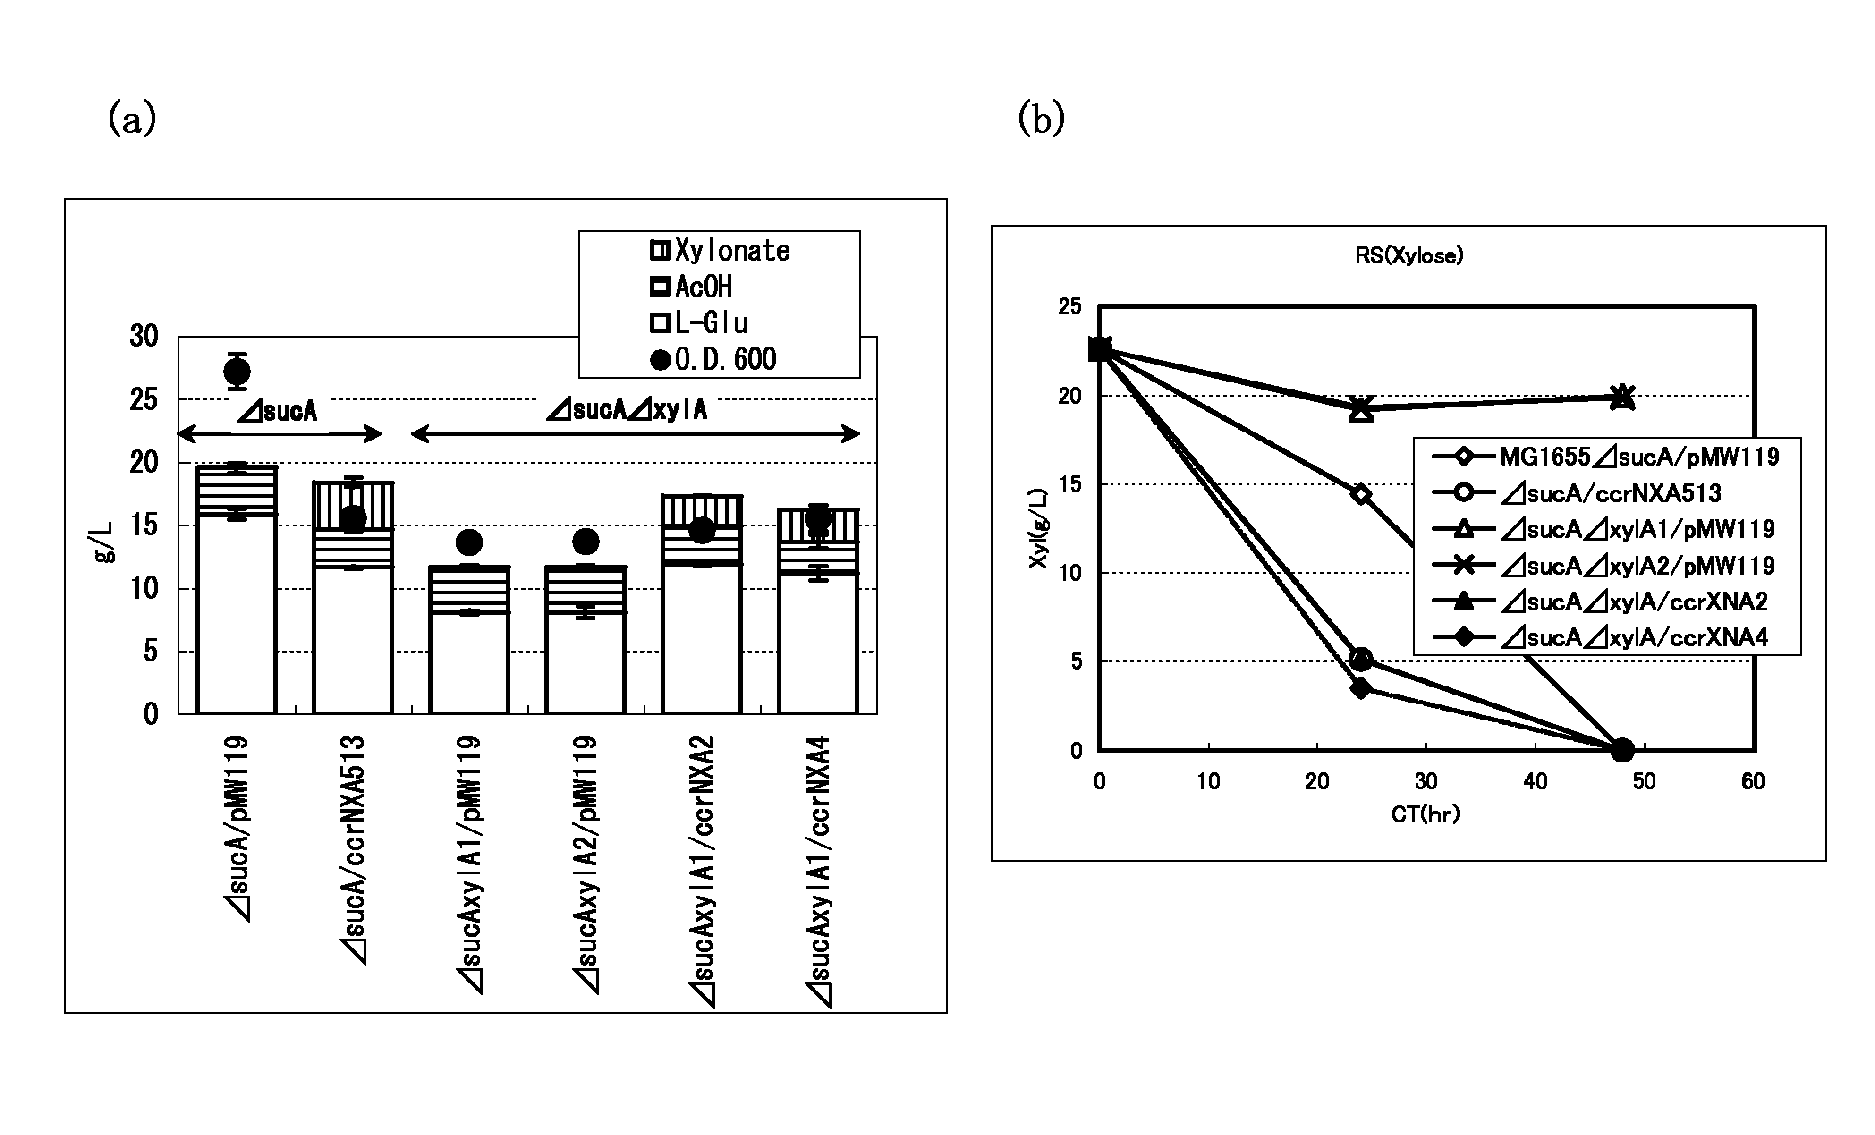 Method for producing a target substance by fermentation